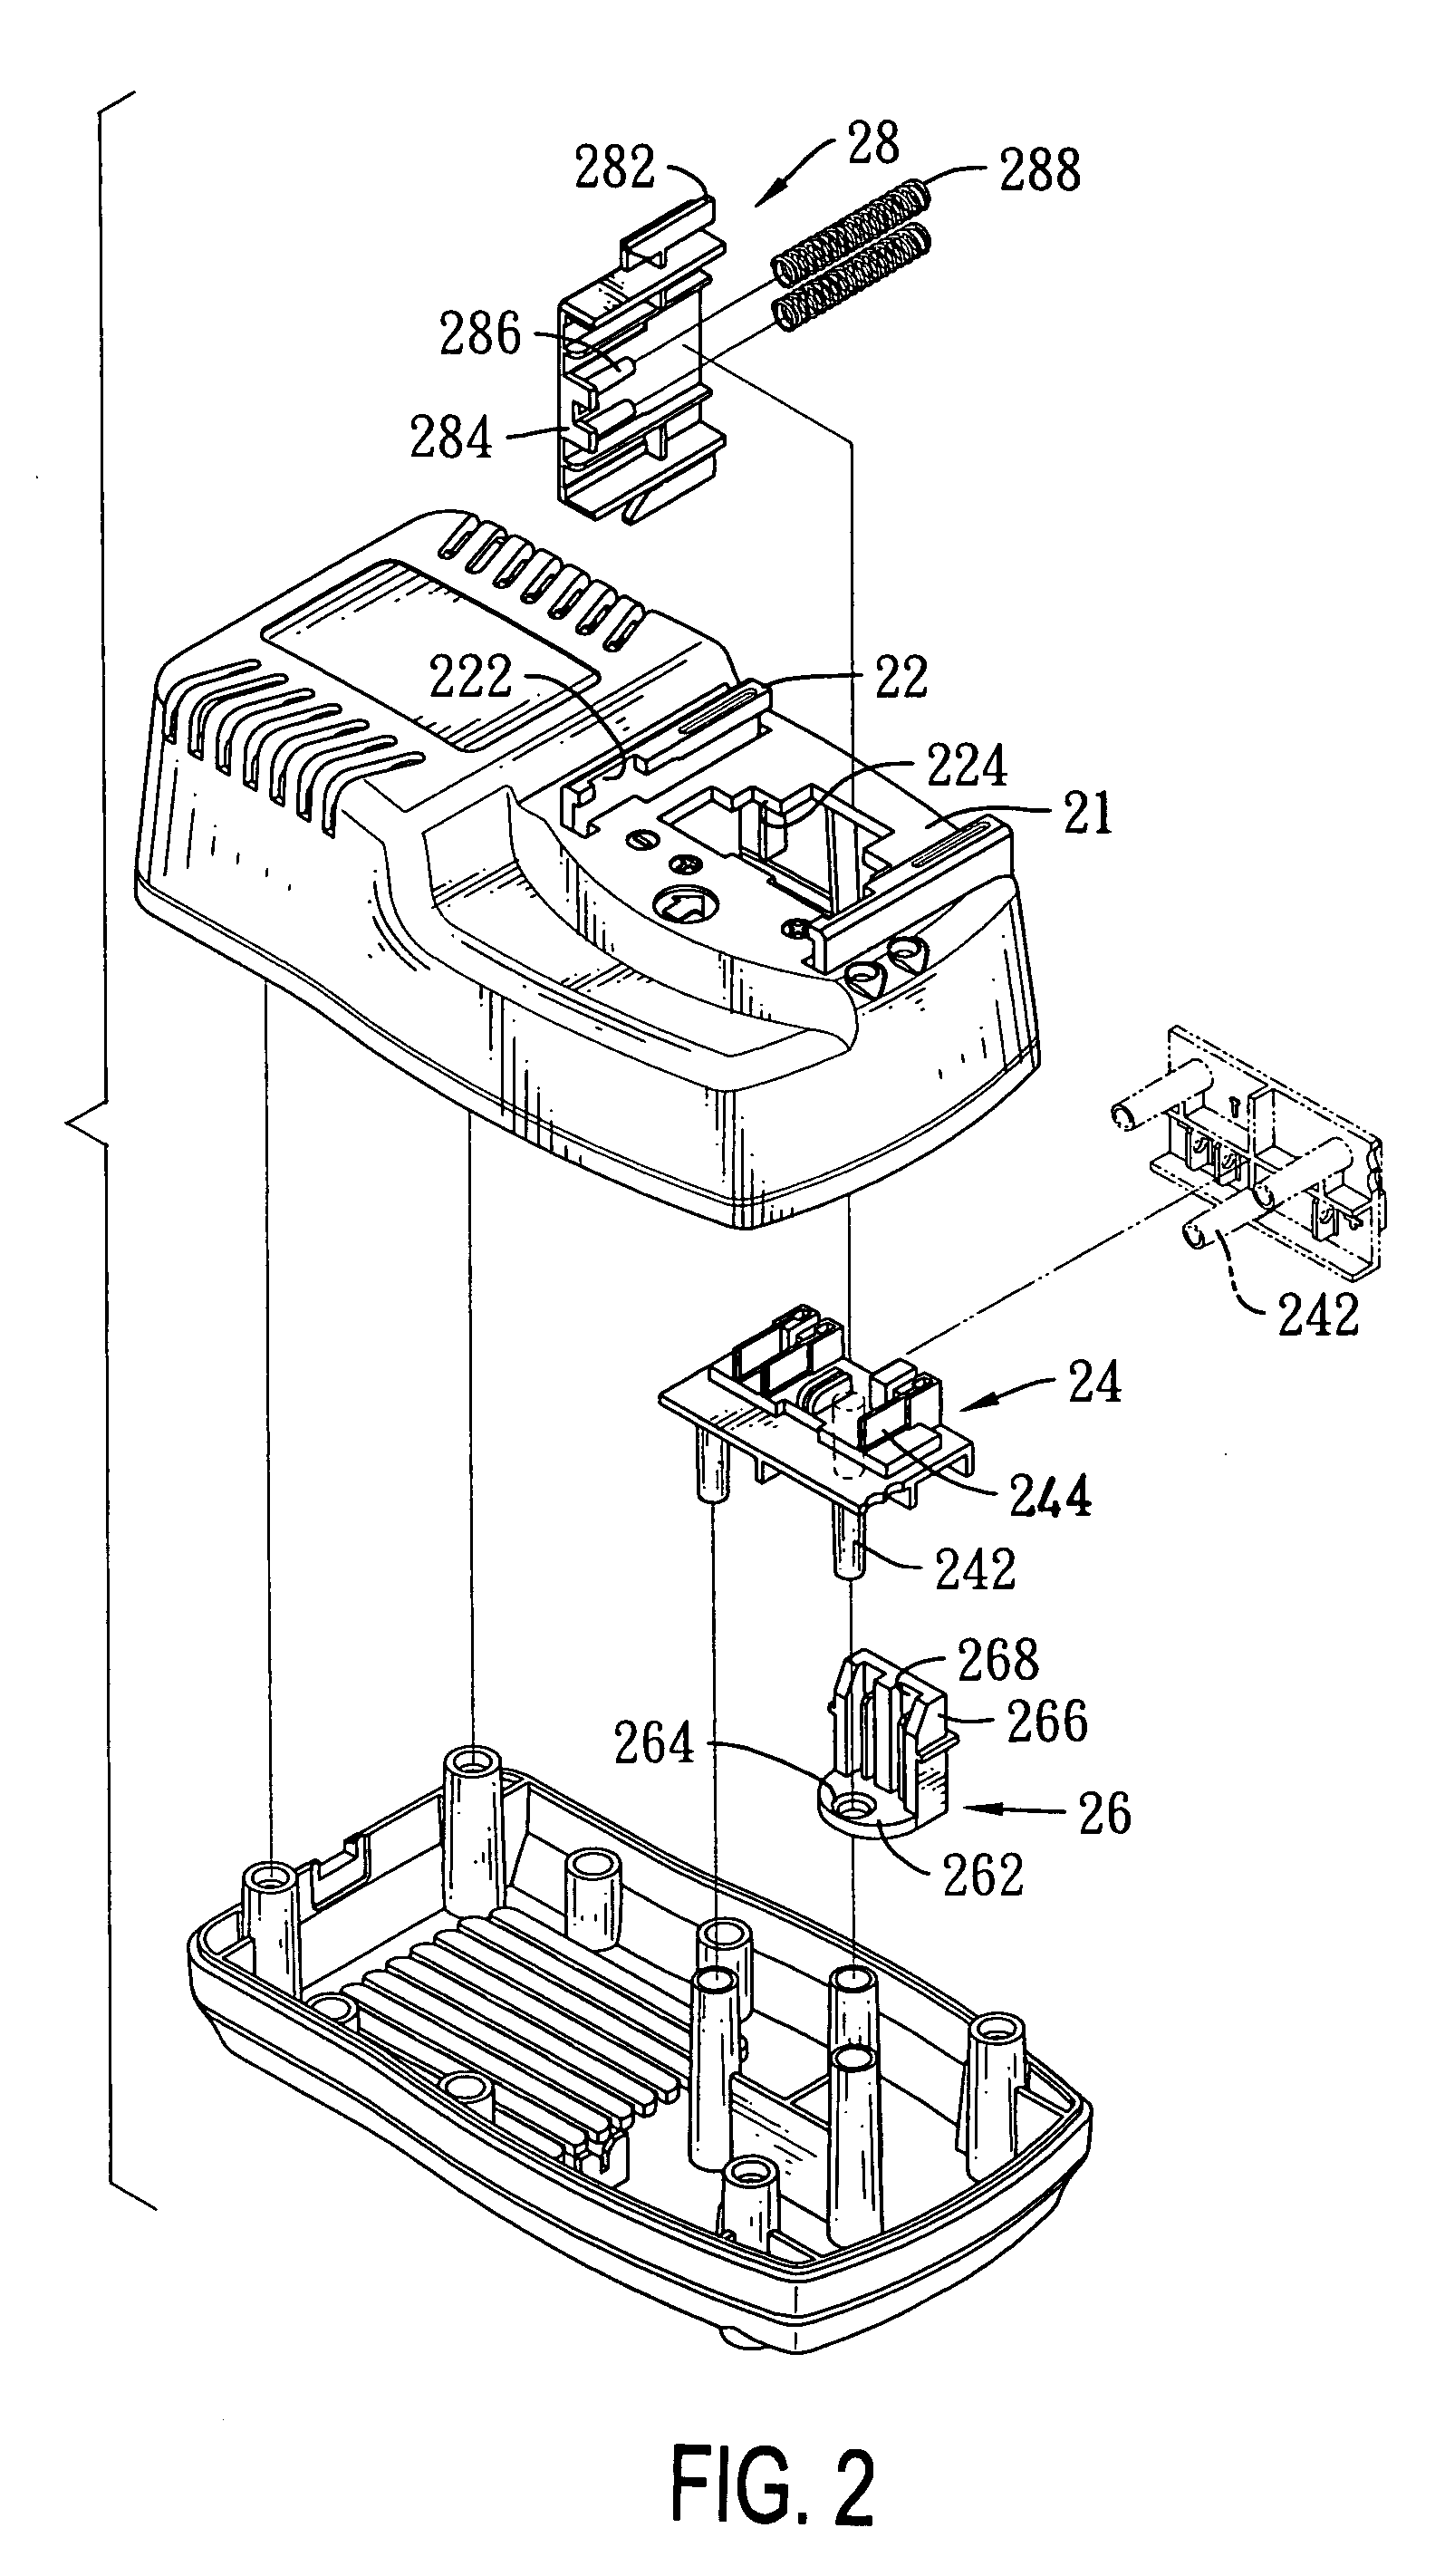 Power cell and charger assembly for an electrical tool